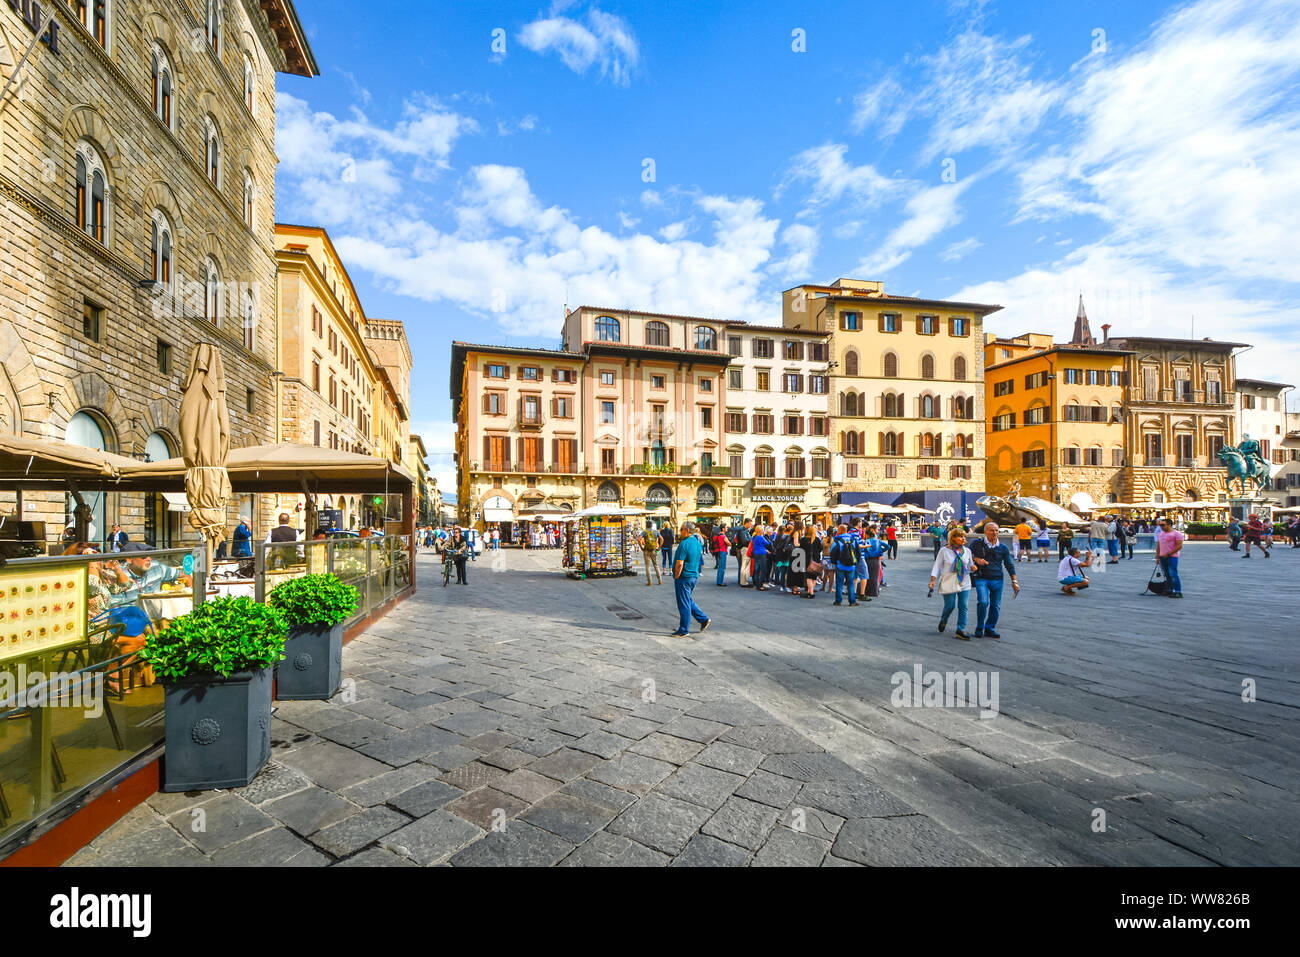 Tourists enjoy the warm afternoon at Piazza della Signoria in Florence Italy as they dine at an outdoor cafe and buy souvenirs from a gift stand Stock Photo